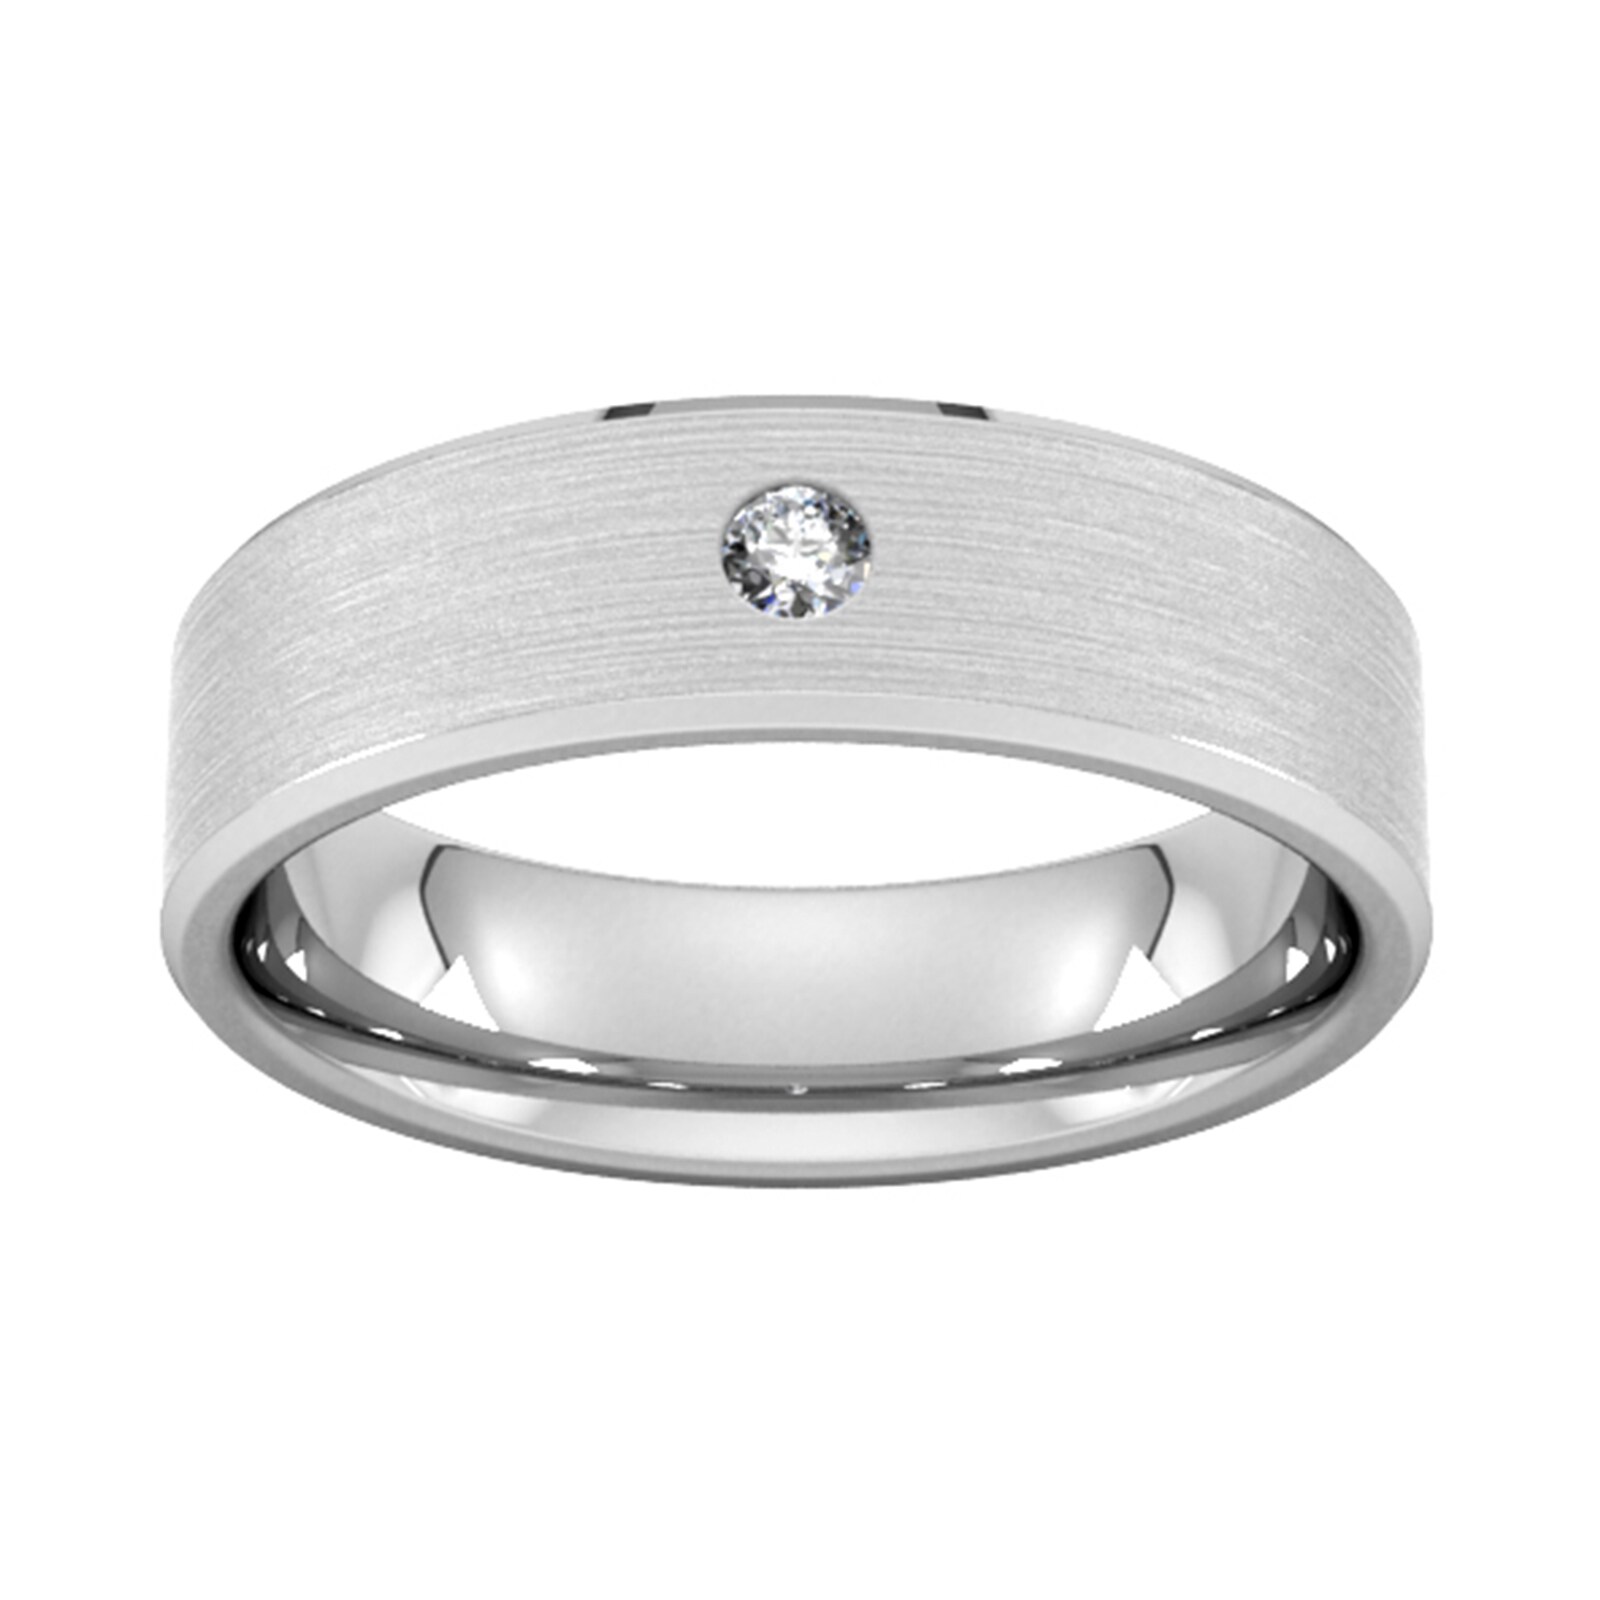 6mm Brilliant Cut Diamond Set Chamfered Edge Wedding Ring In 18 Carat White Gold - Ring Size Y